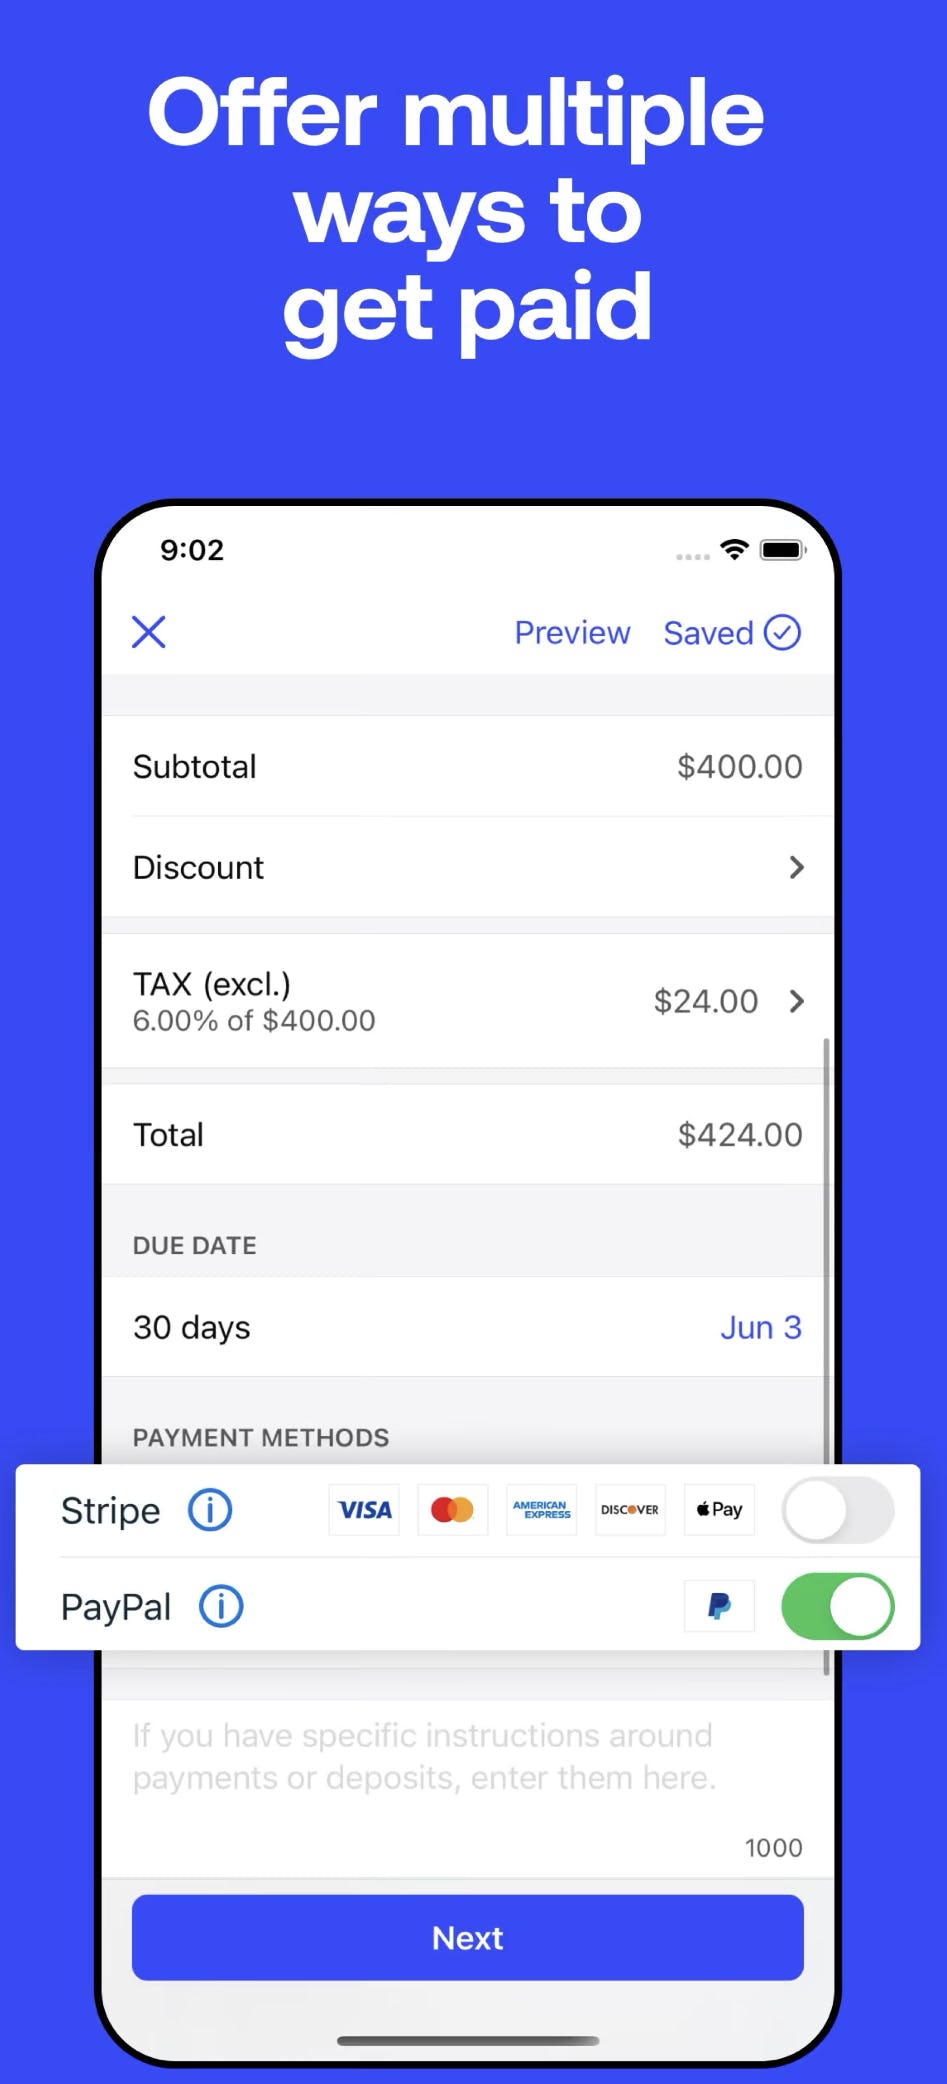 Invoice2go Software - Offering multiple ways to pay to ensure your clients have the options they want